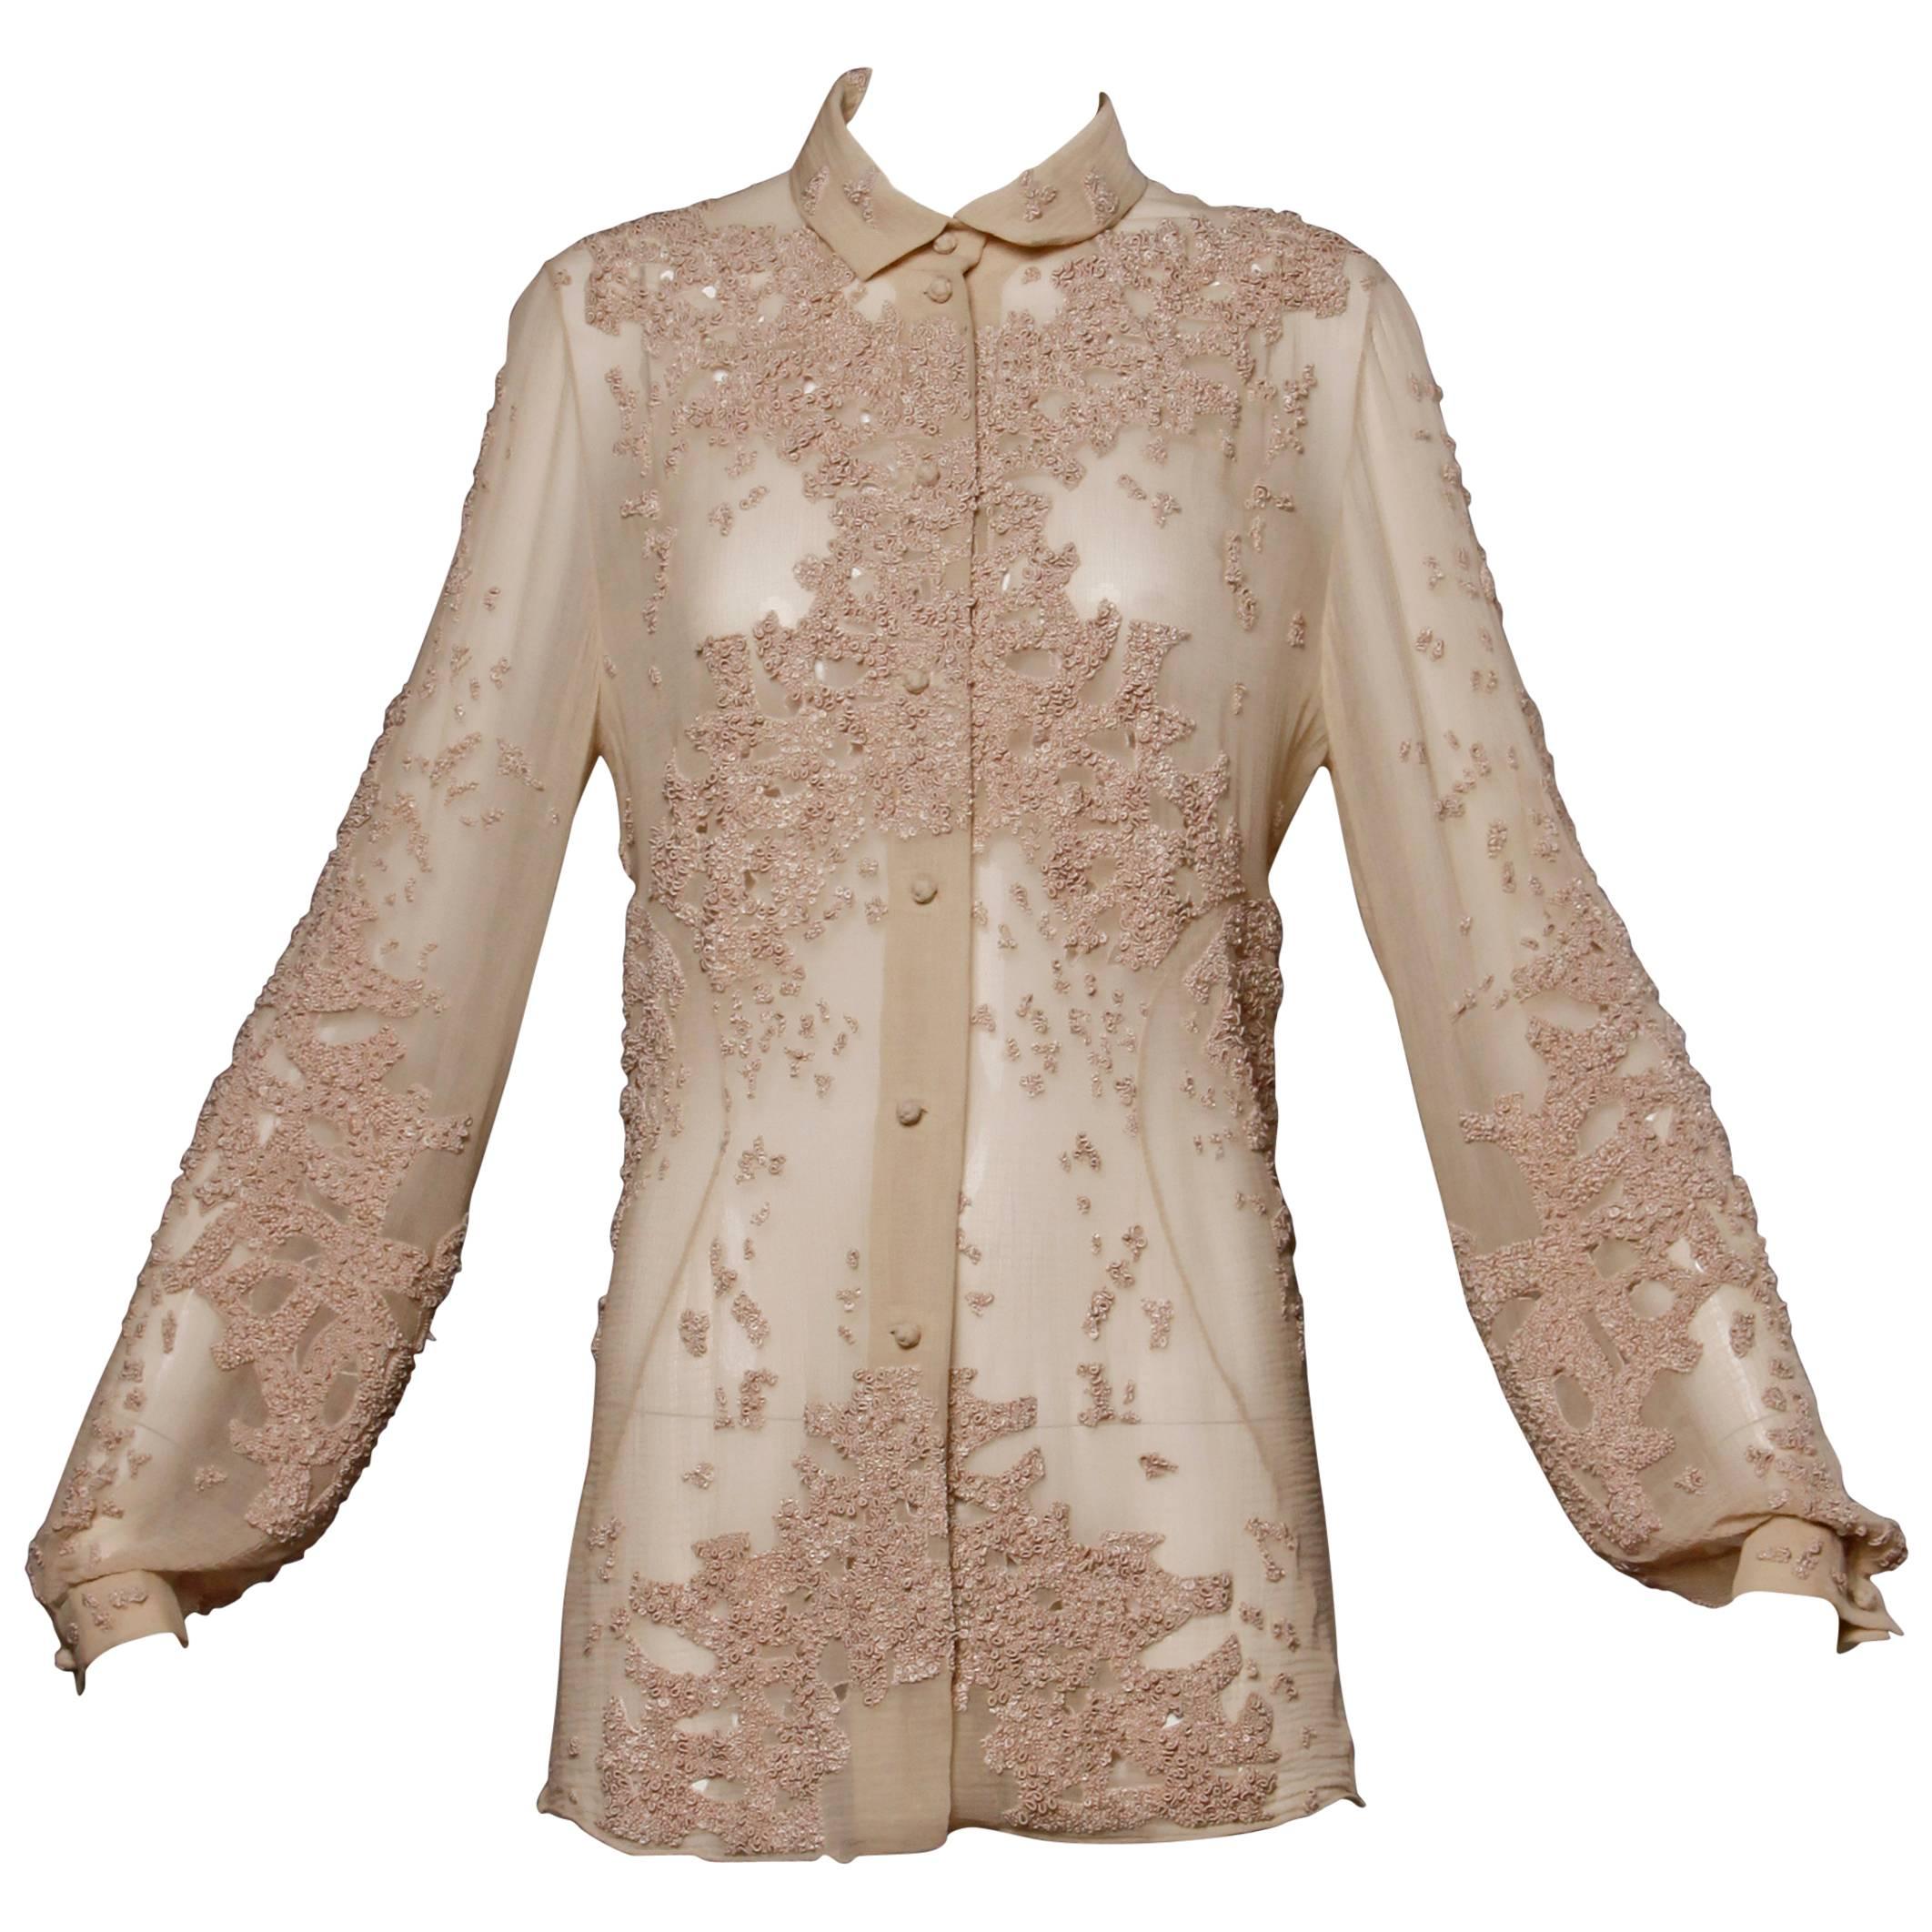 Spectacular Chado Ralph Rucci Sheer Nude Silk Cut Out Embroidery Blouse Top